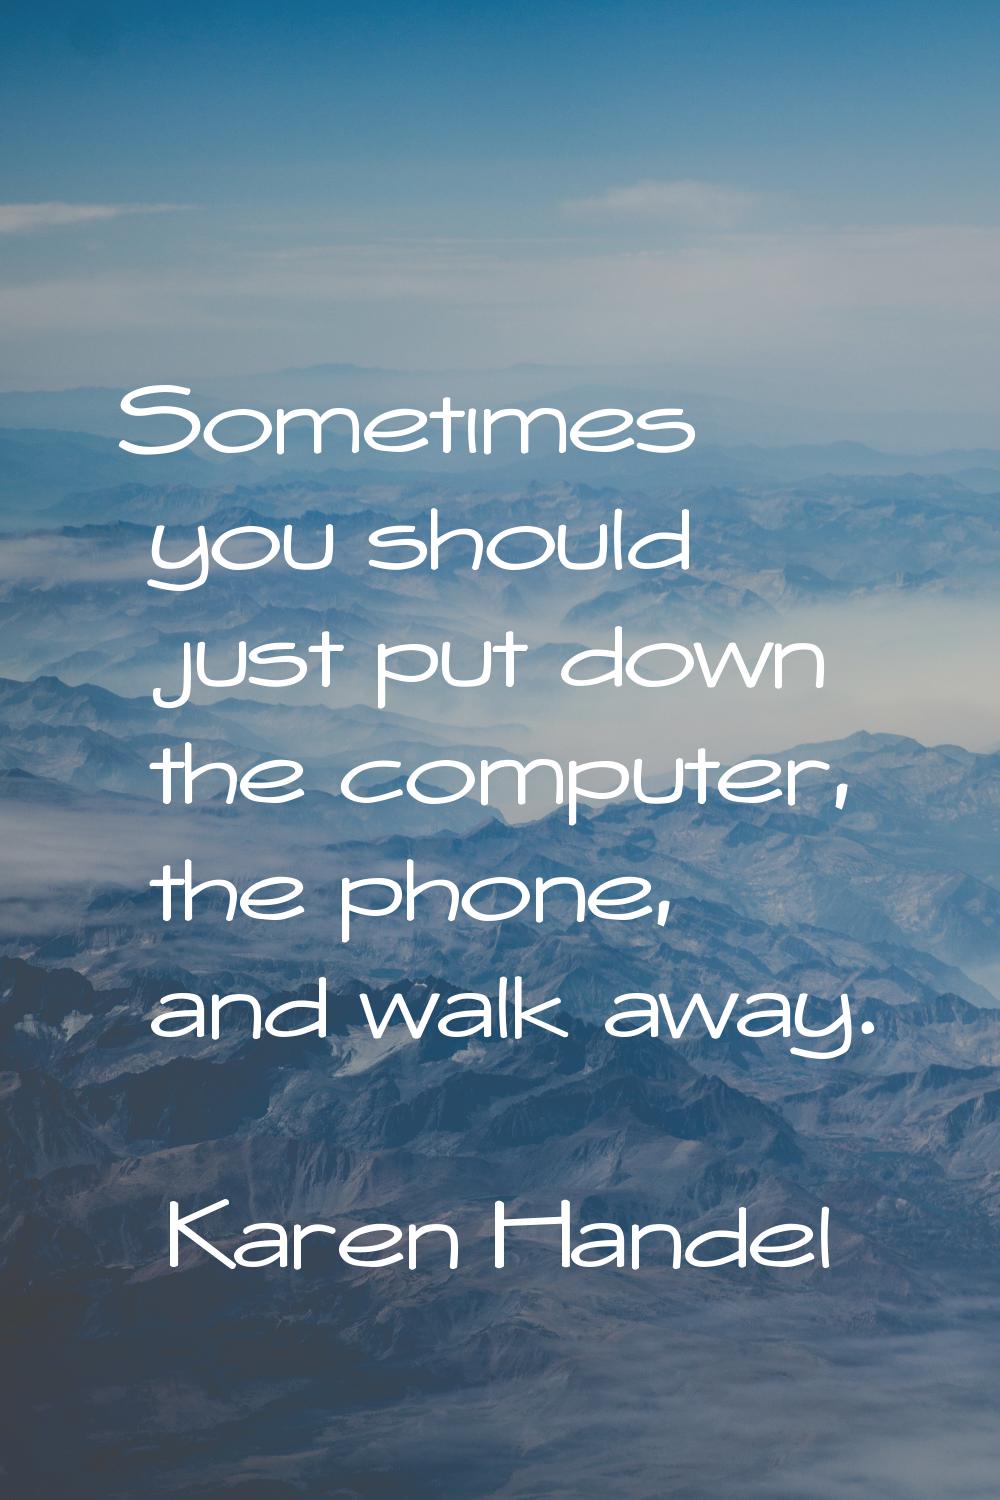 Sometimes you should just put down the computer, the phone, and walk away.